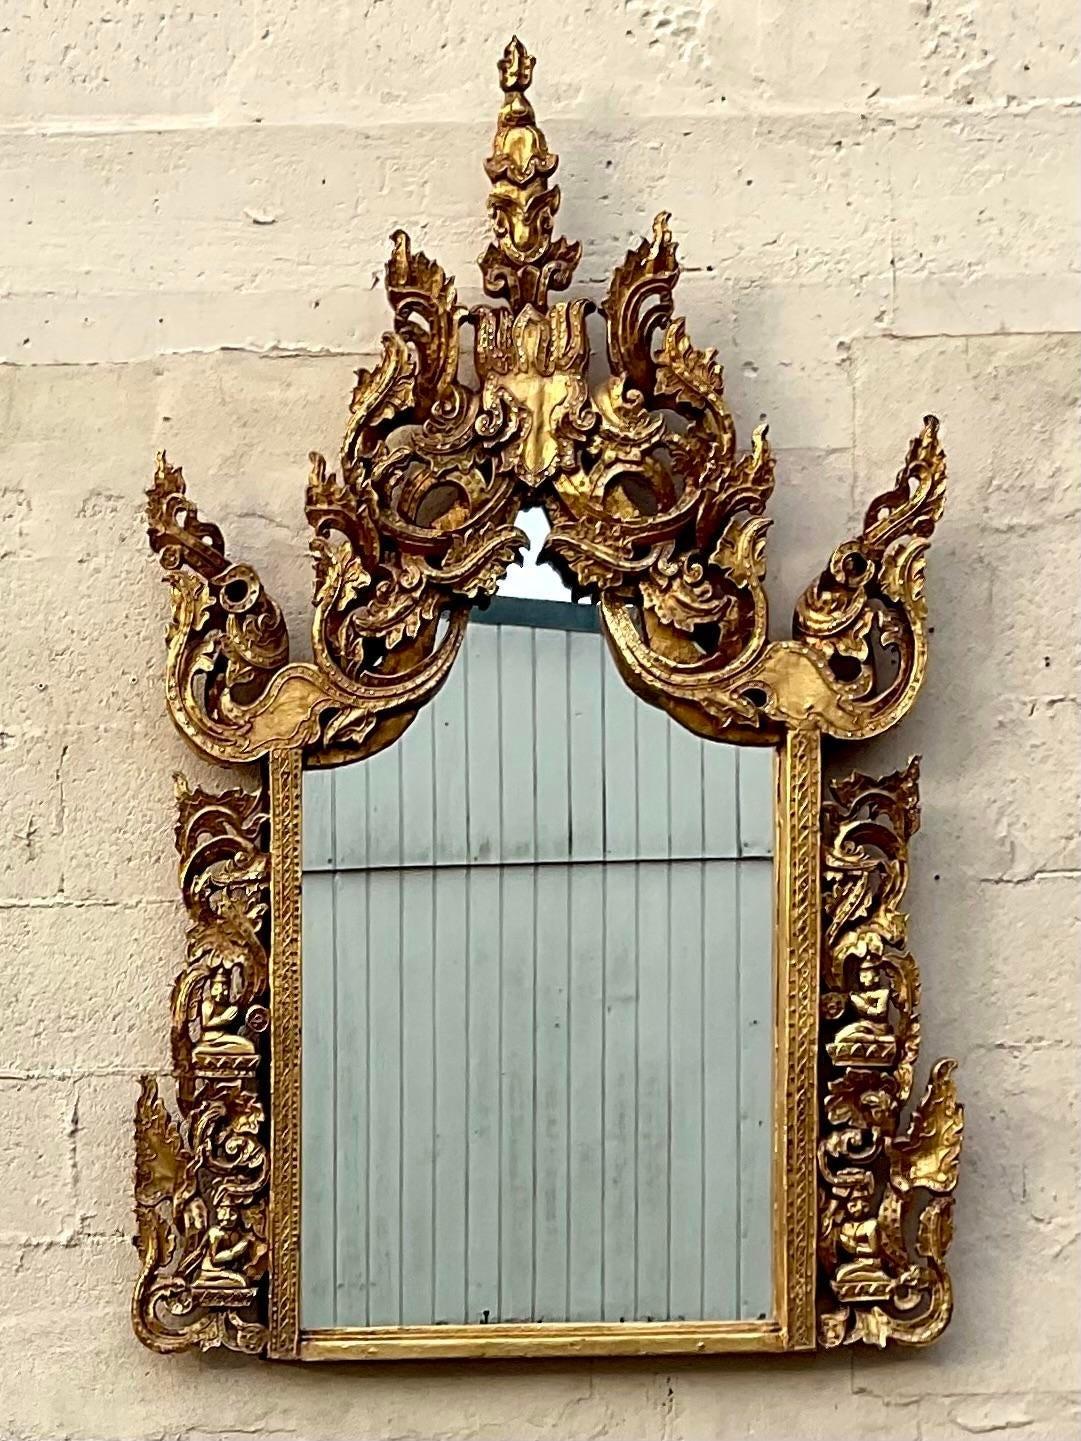 A fabulous vintage Boho wall mirror. A chic Temple design in a bright gilt finish. Hand carved detail with mirrored pin dots along the flourish. A real showstopper. Acquired from a Palm Beach estate.